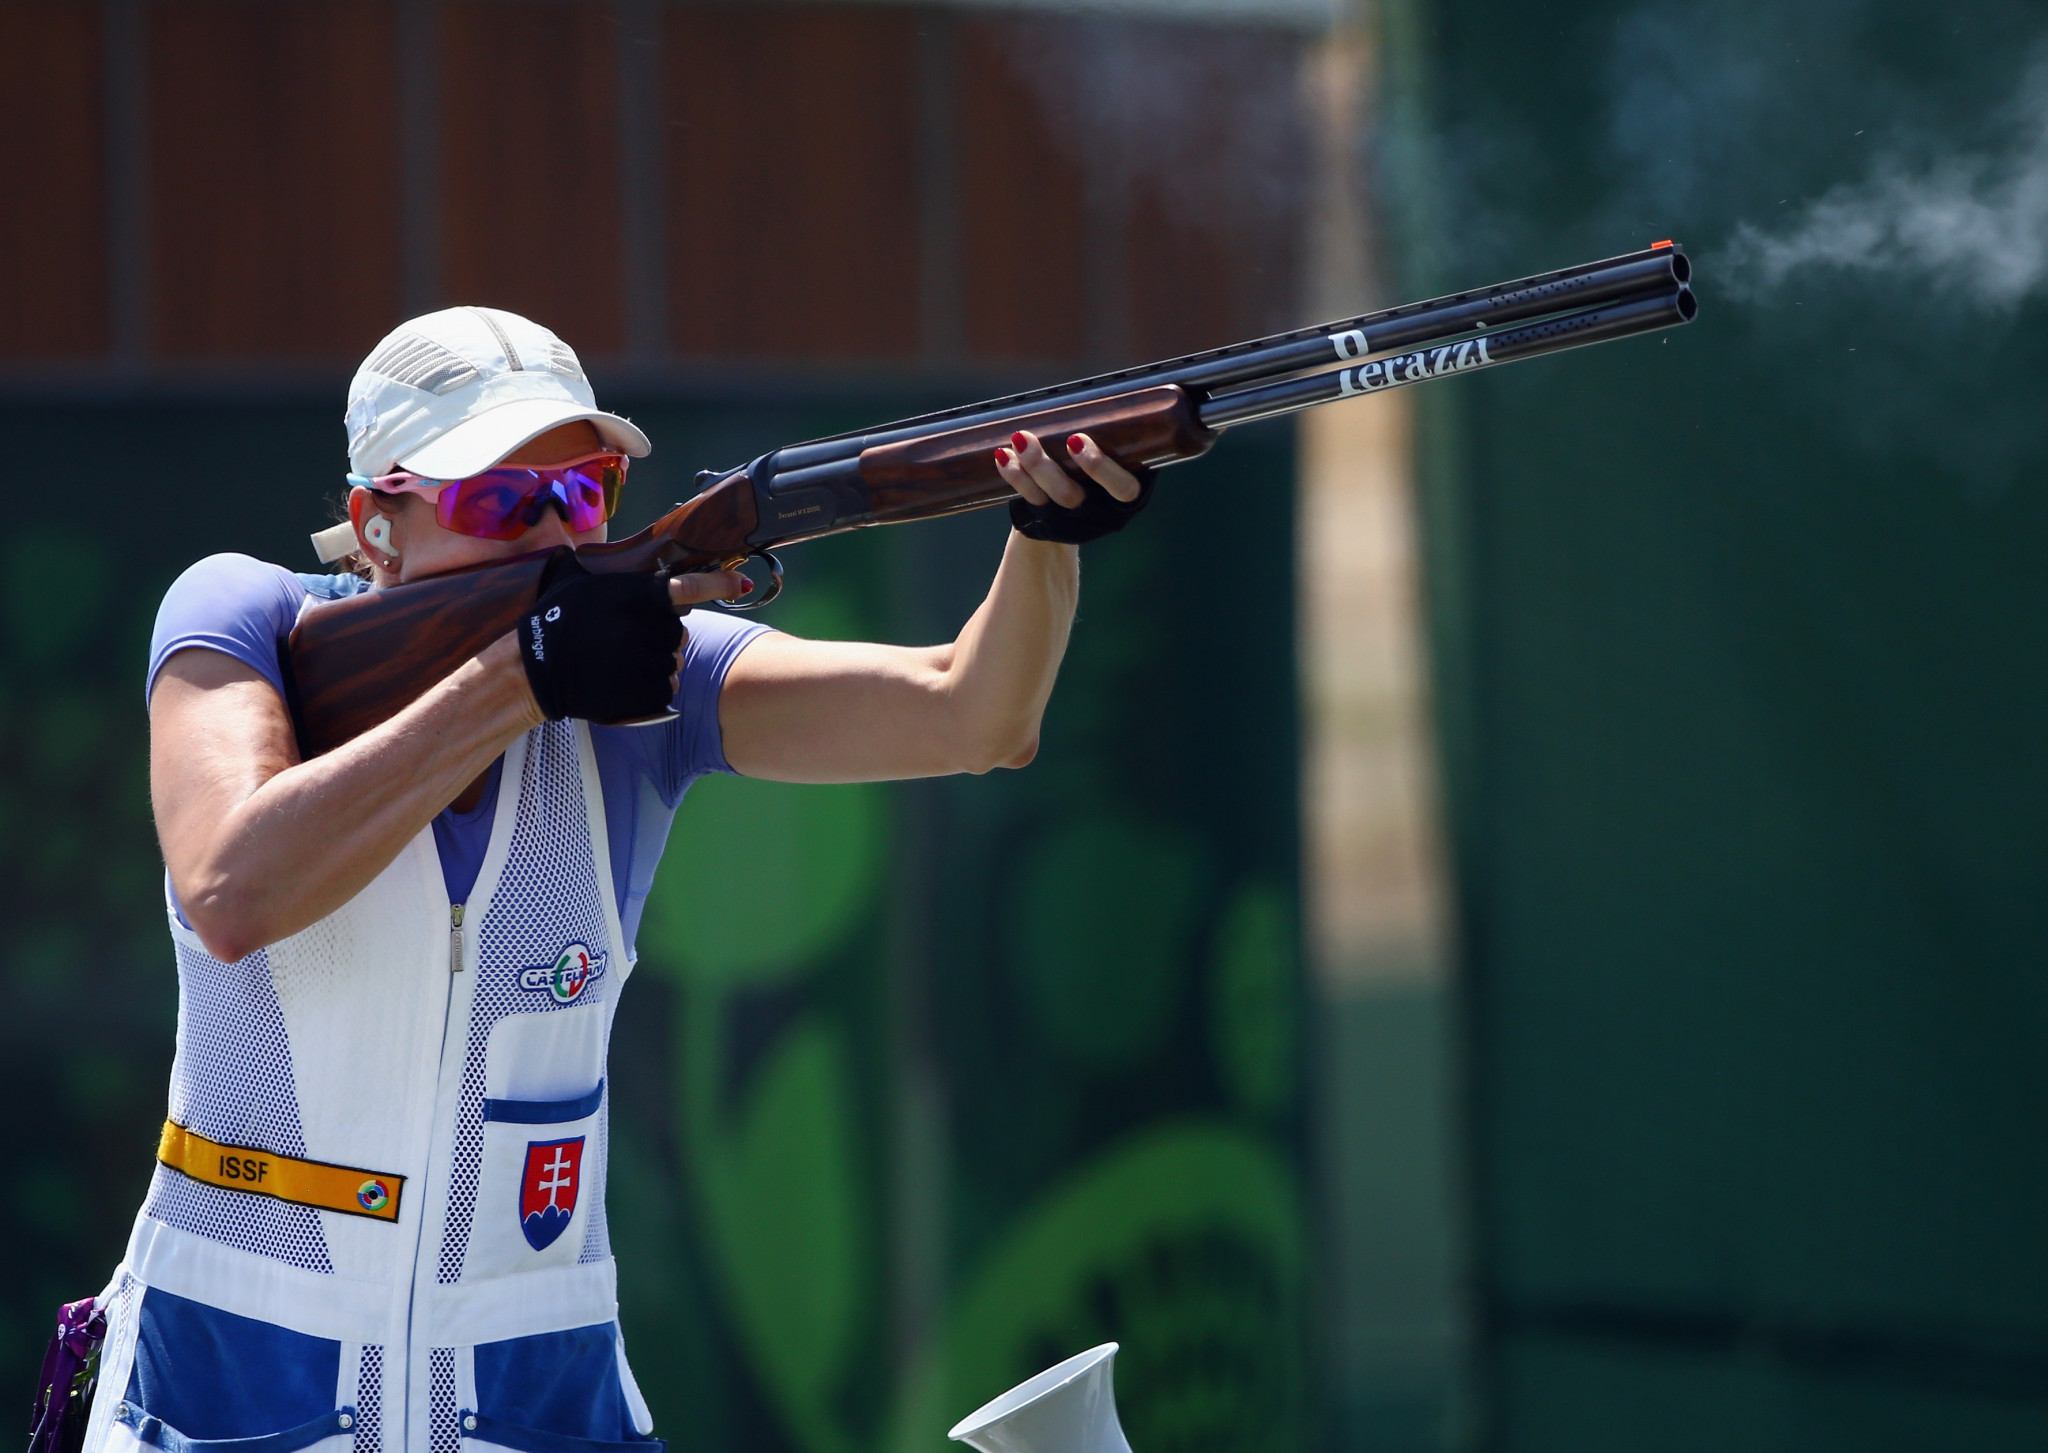 Danka Bartekova claimed the gold in the women’s skeet competition at the European Shotgun Championships ©Getty Images